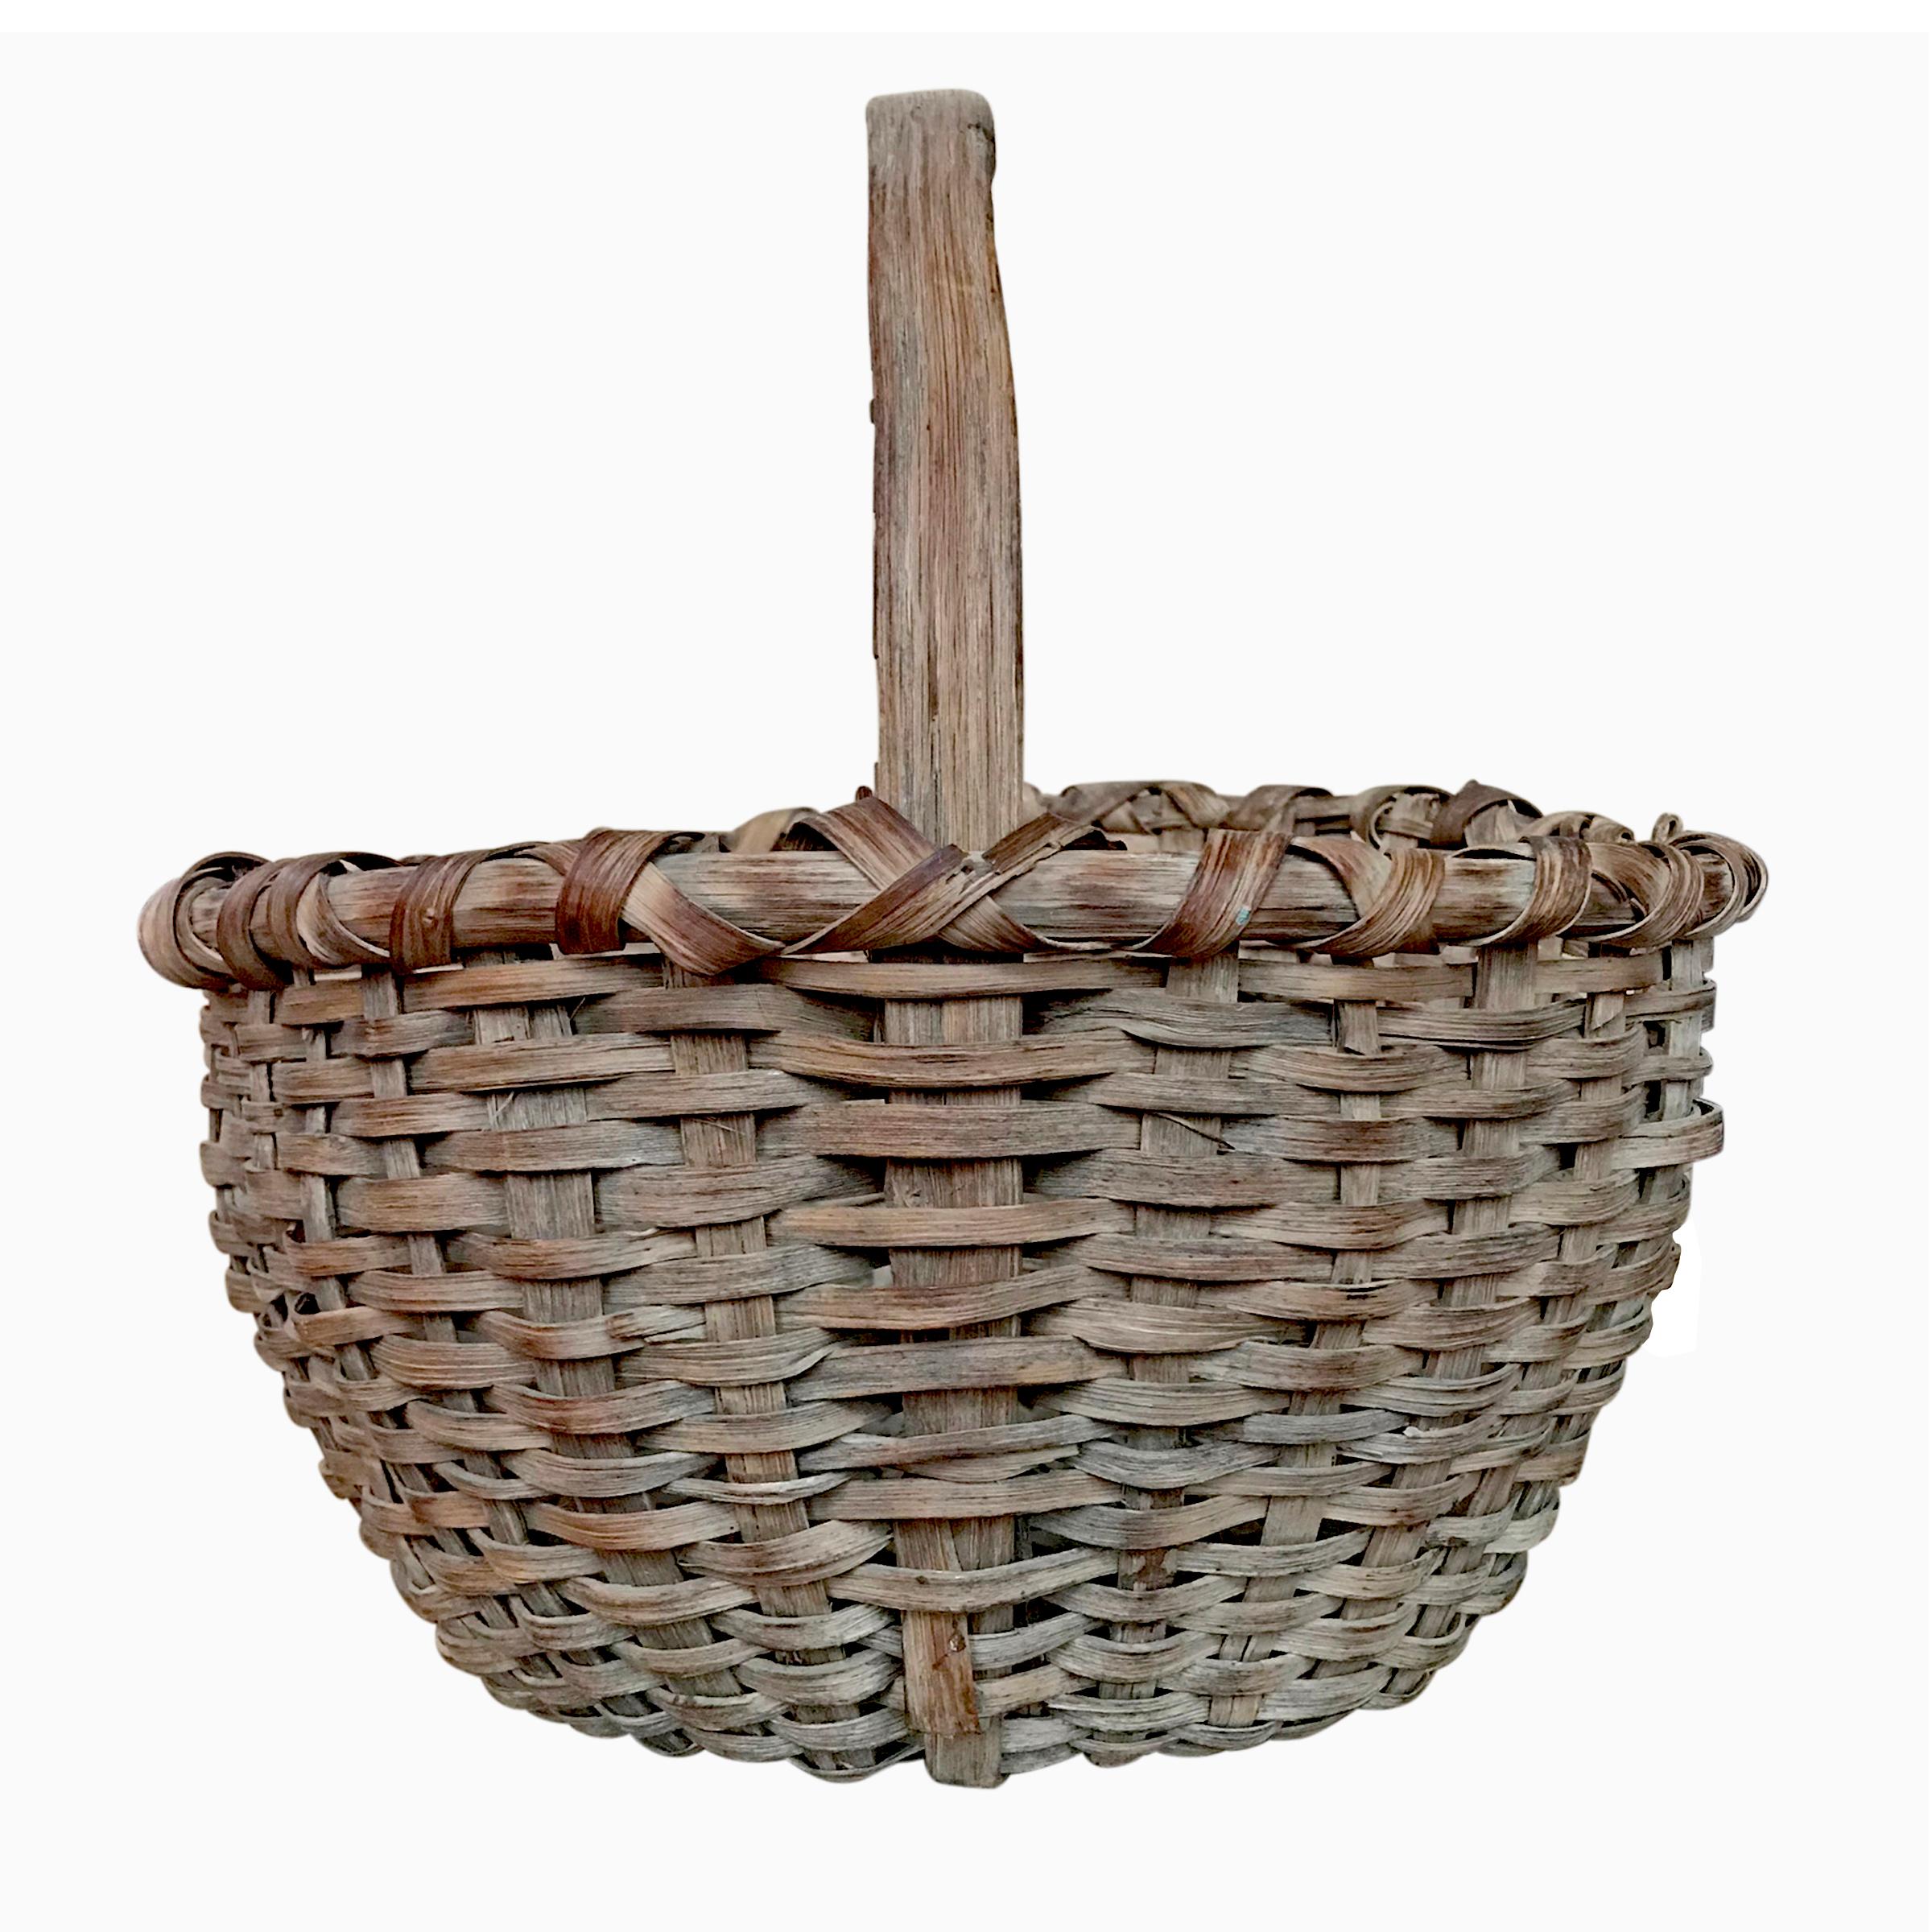 A late 19th century American handwoven oak splint gathering basket with a single bentwood handle, thin splints, and a wonderful patina. Found in Connecticut.